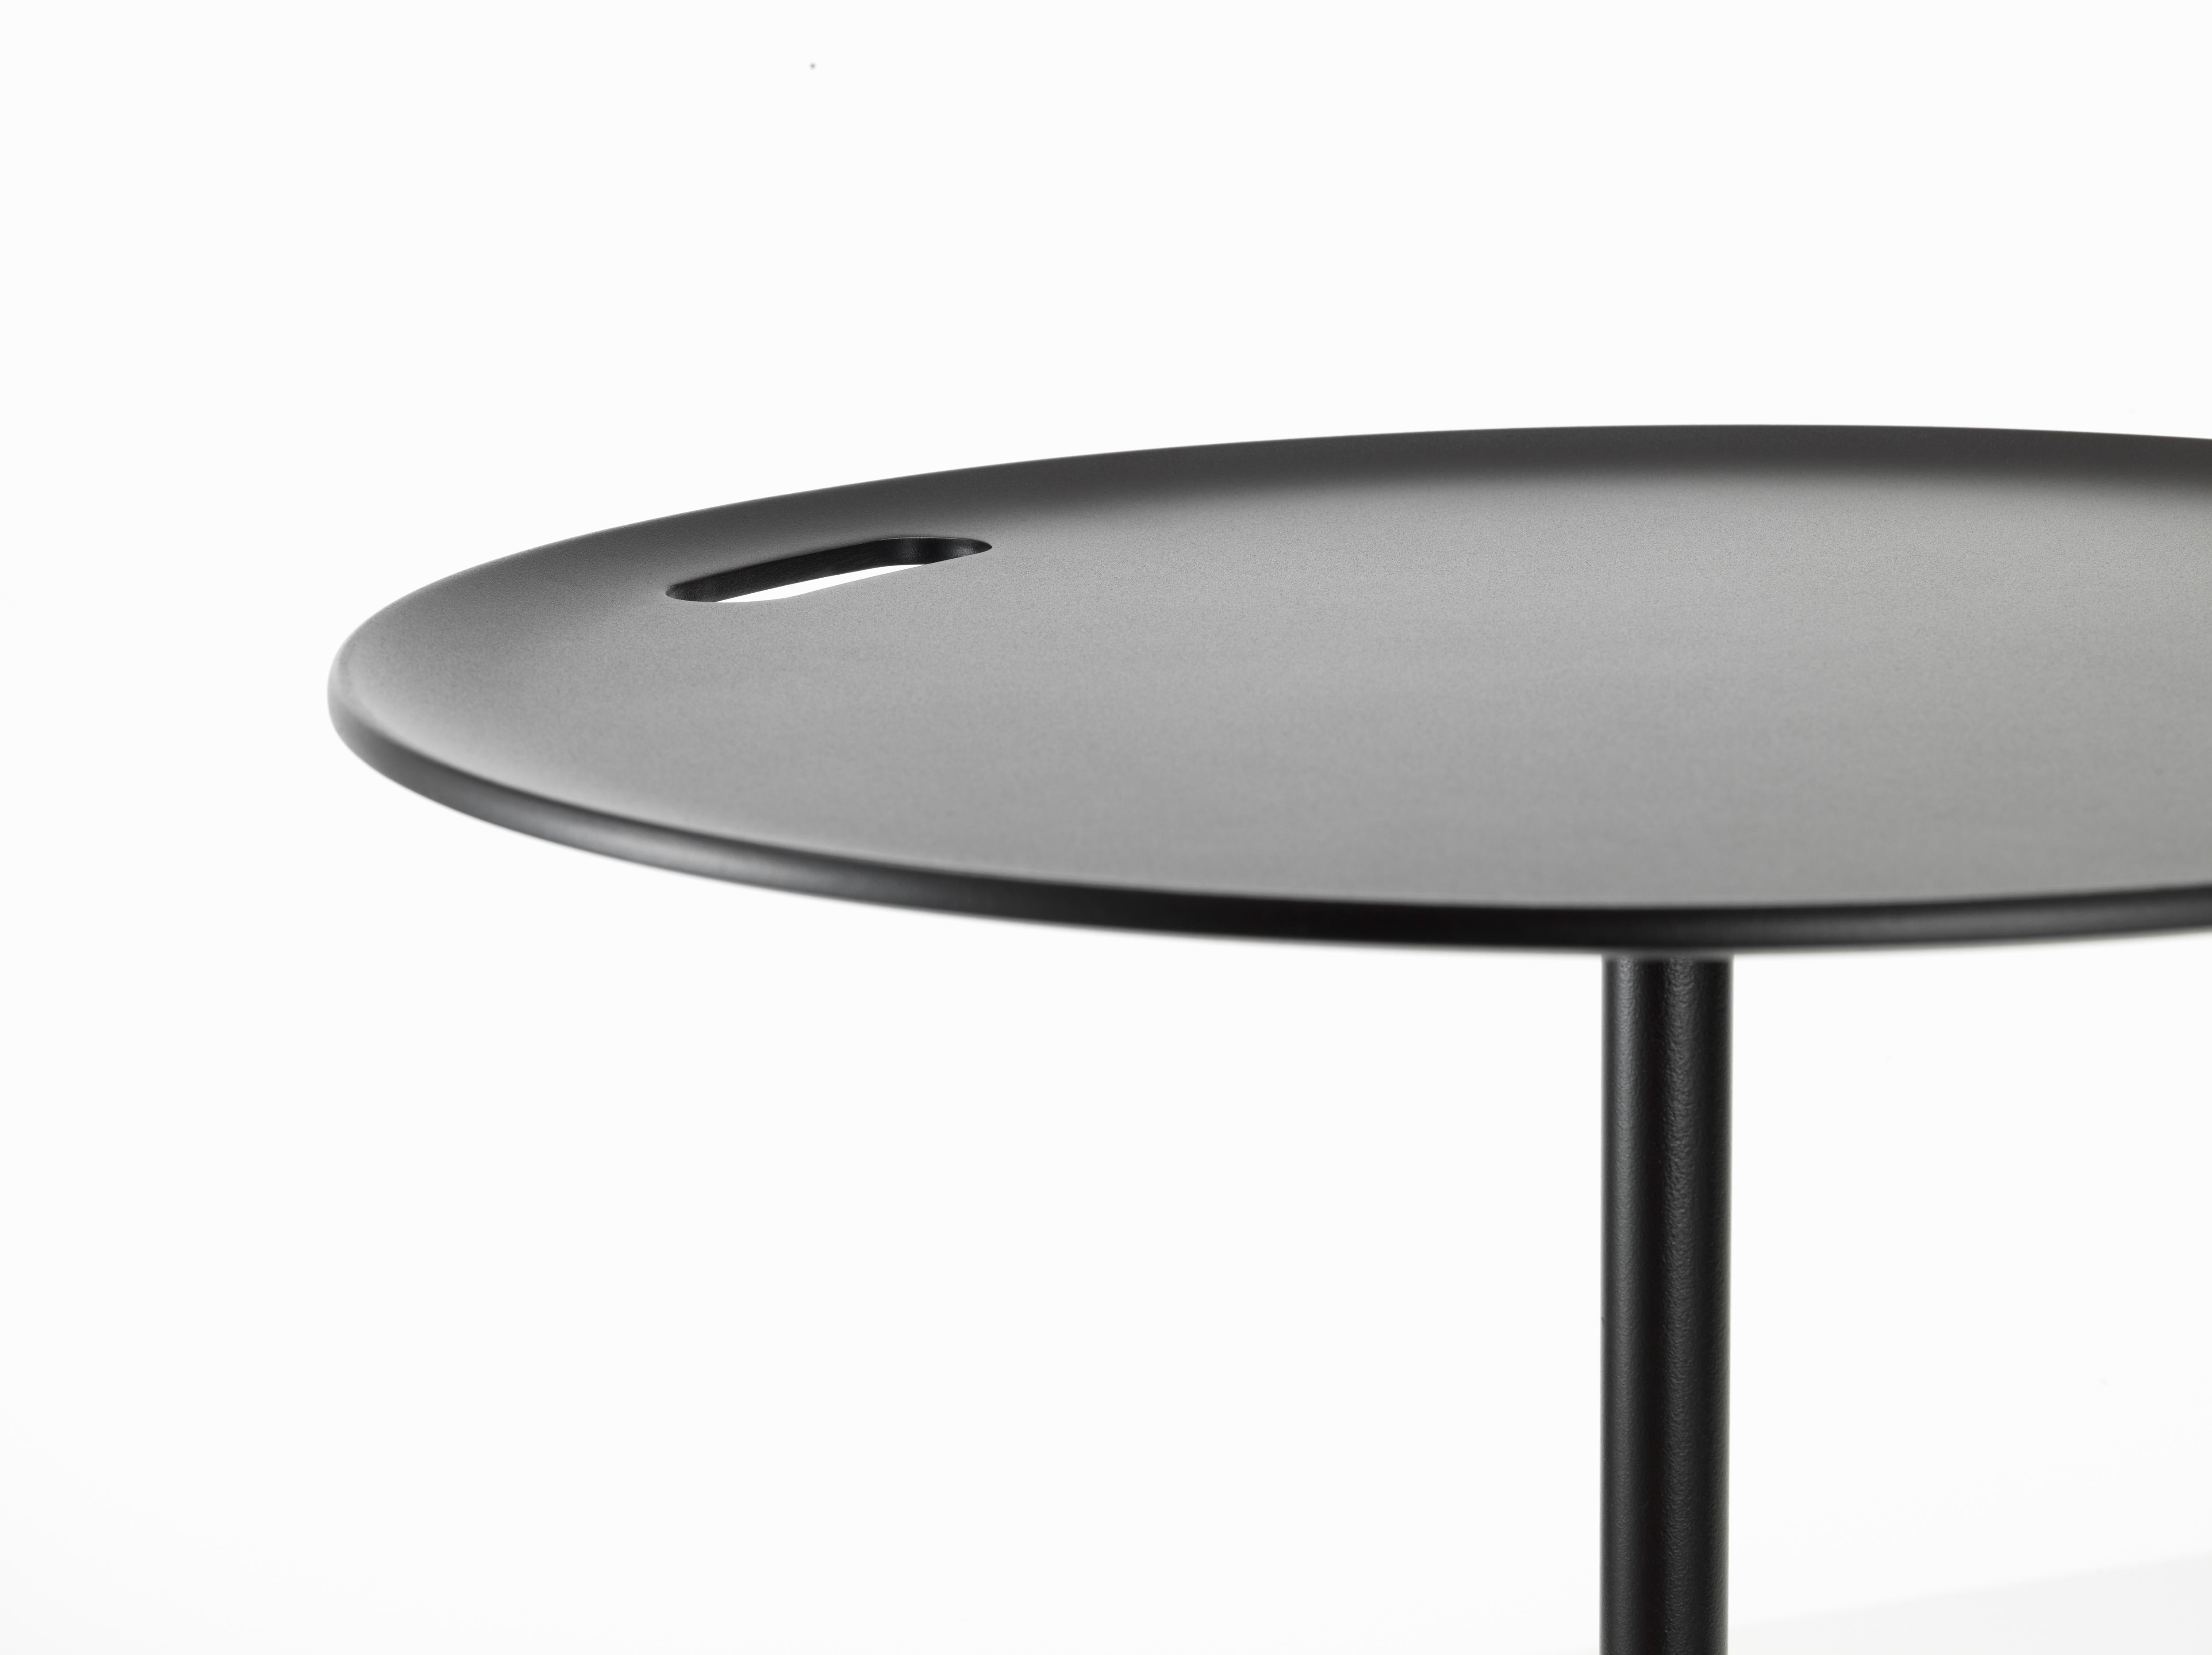 These products are only available in the United States.

The Occasional Tables by Jasper Morrison have an understated look and come in three heights – ranging from a low side table to a standard serving table. They have round, beveled-edge tops